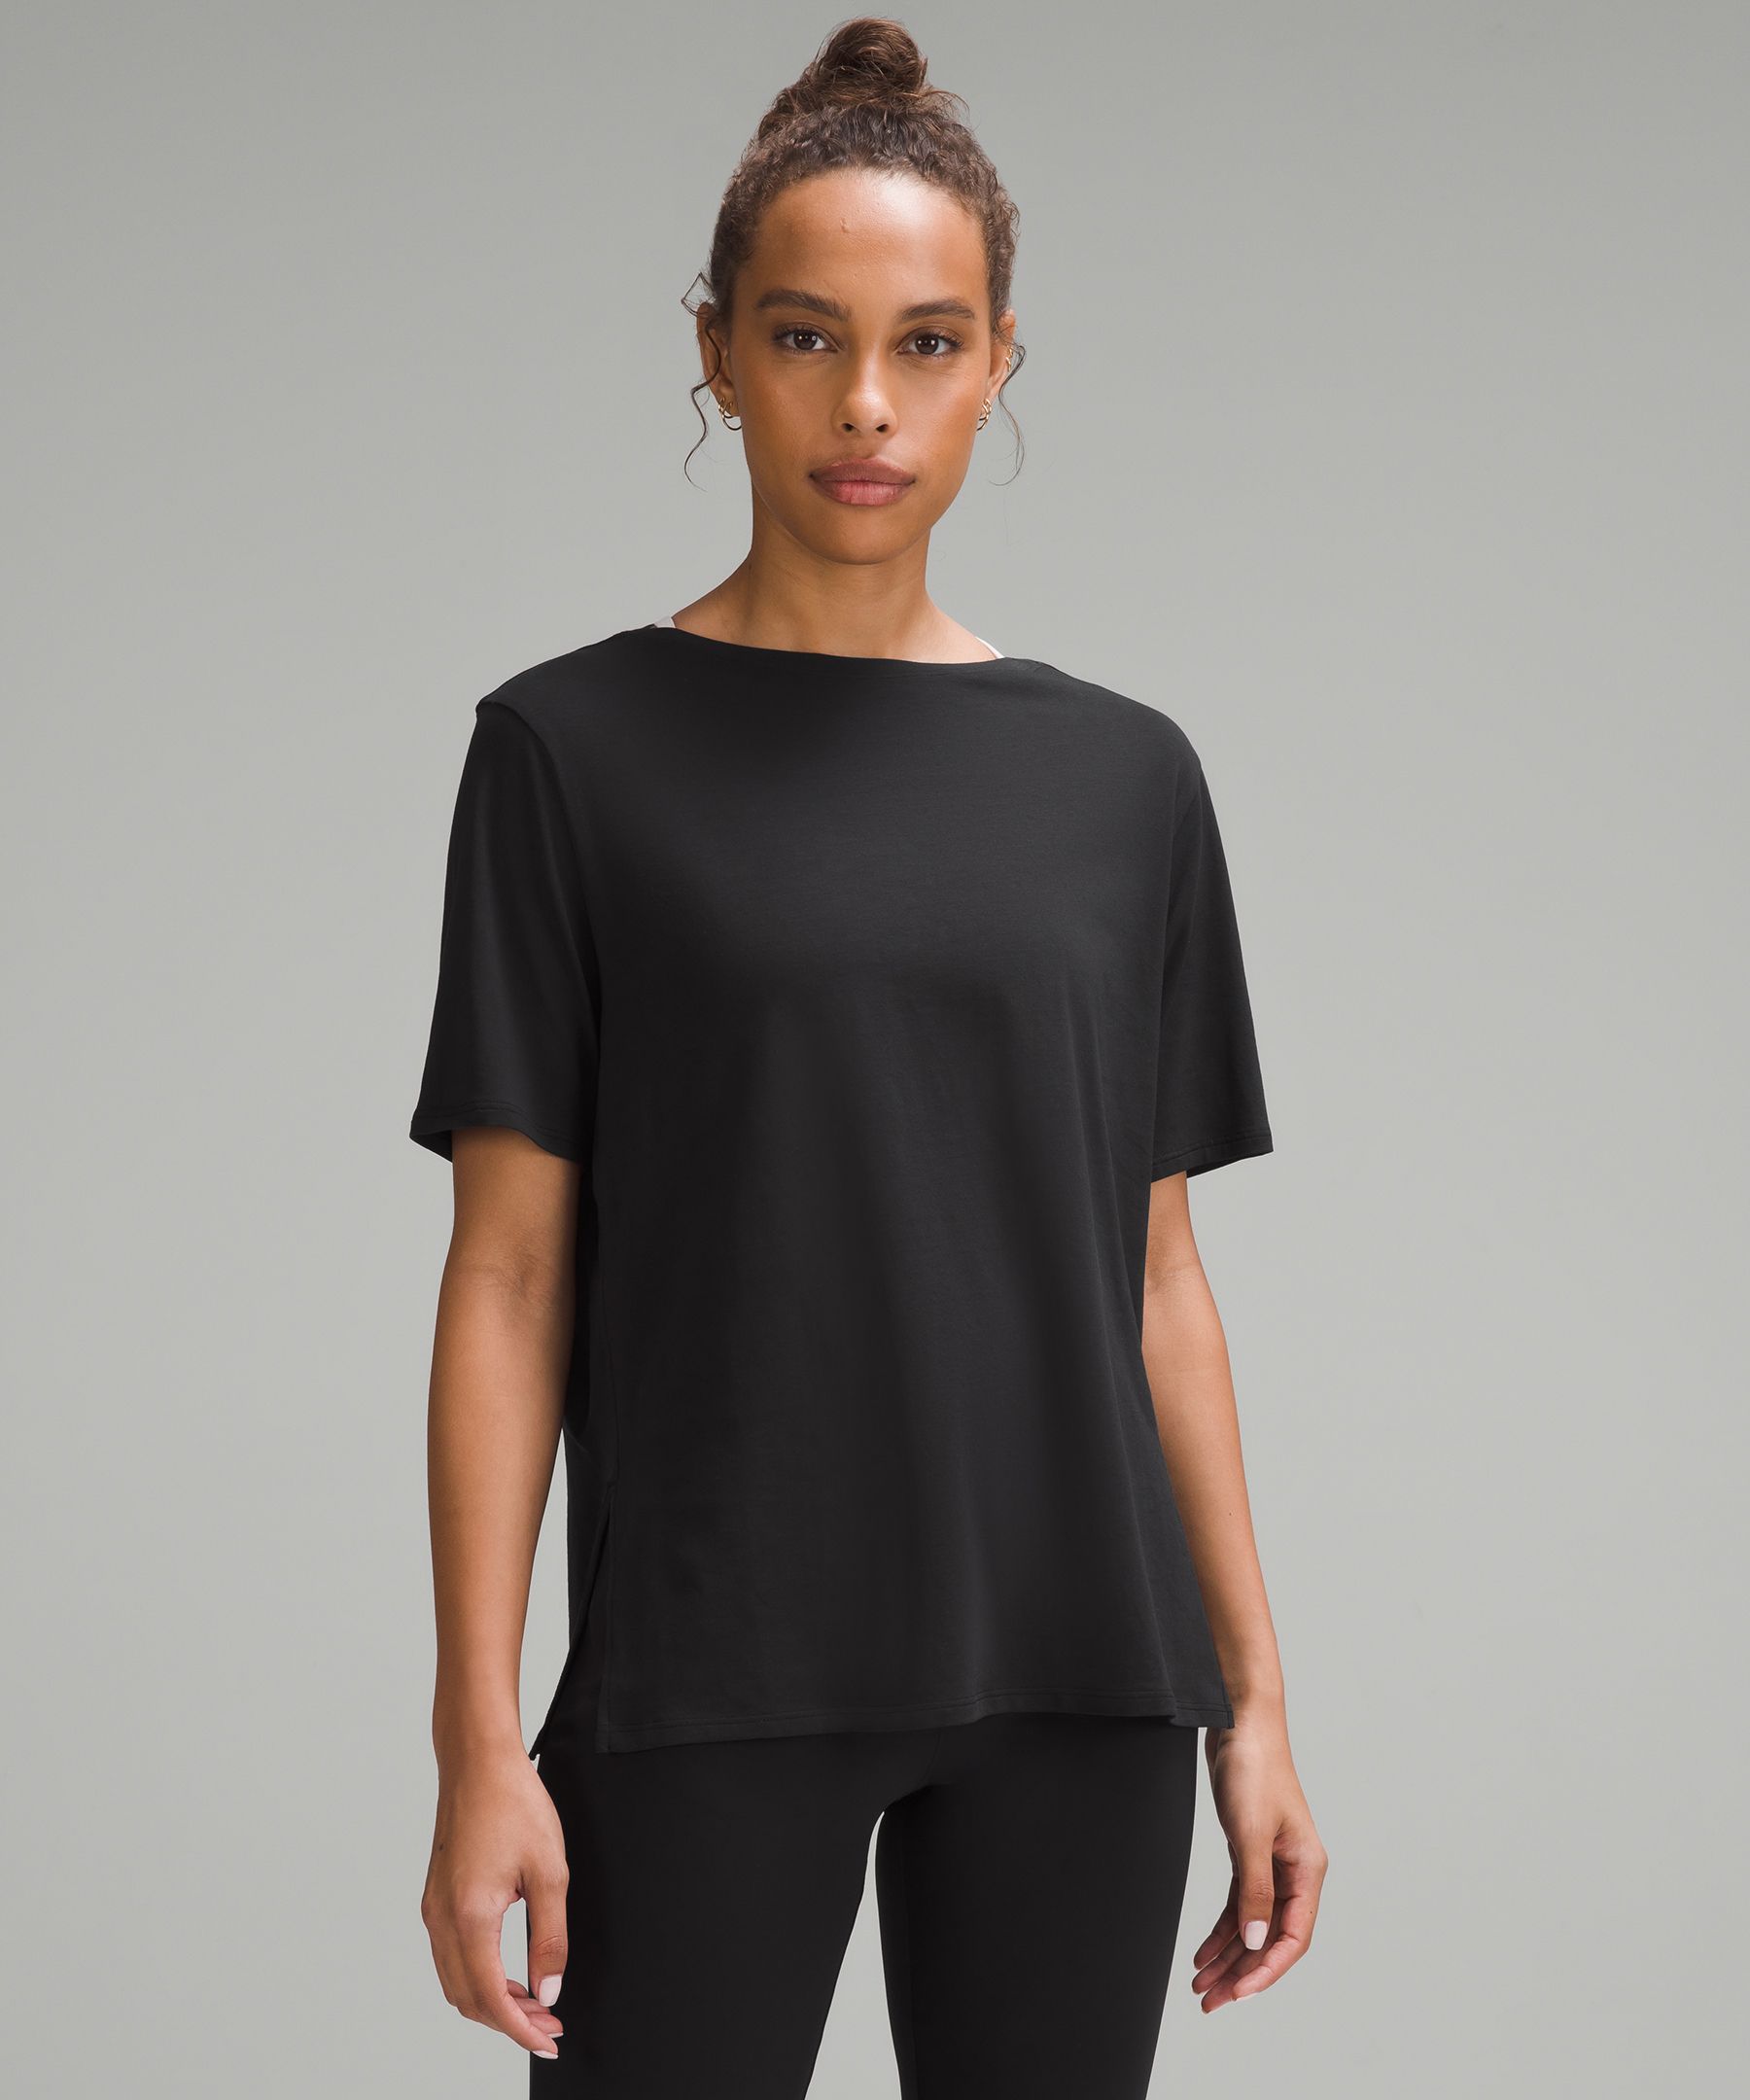 Lululemon athletica Relaxed-Fit Boatneck T-Shirt, Women's Short Sleeve  Shirts & Tee's